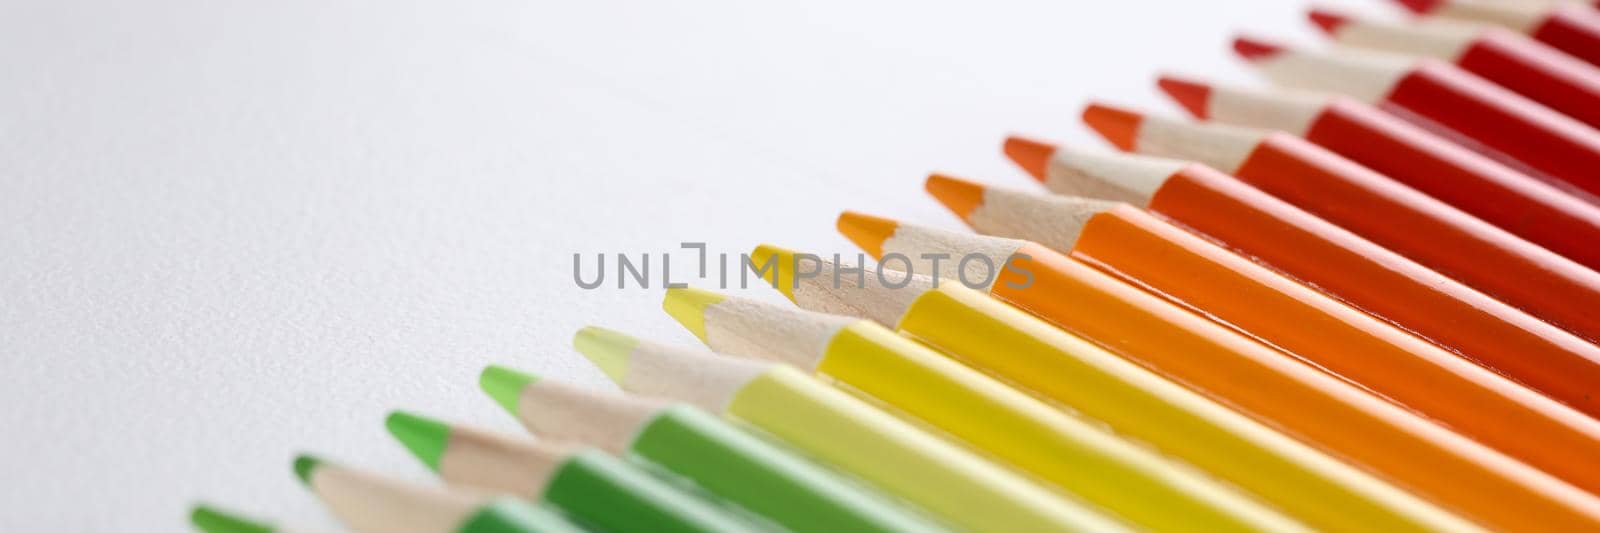 Bright colored pencils with sharp tips lie in a row, close-up. Collection of wooden green red and yellow pencils, learning to draw